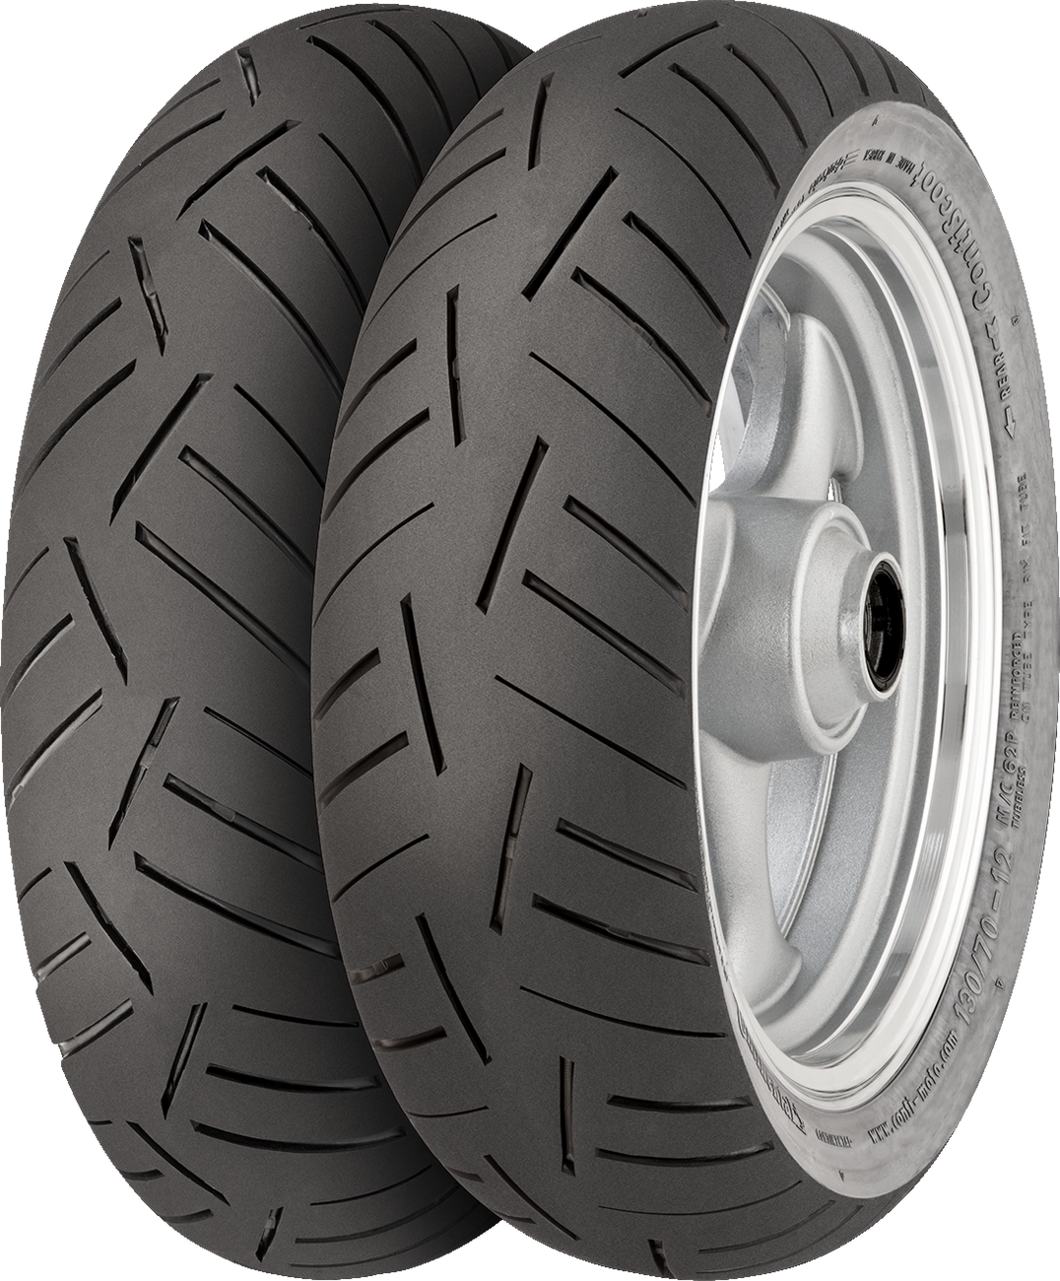 Tire - ContiScoot - Front/Rear - 130/70-12 - 62P